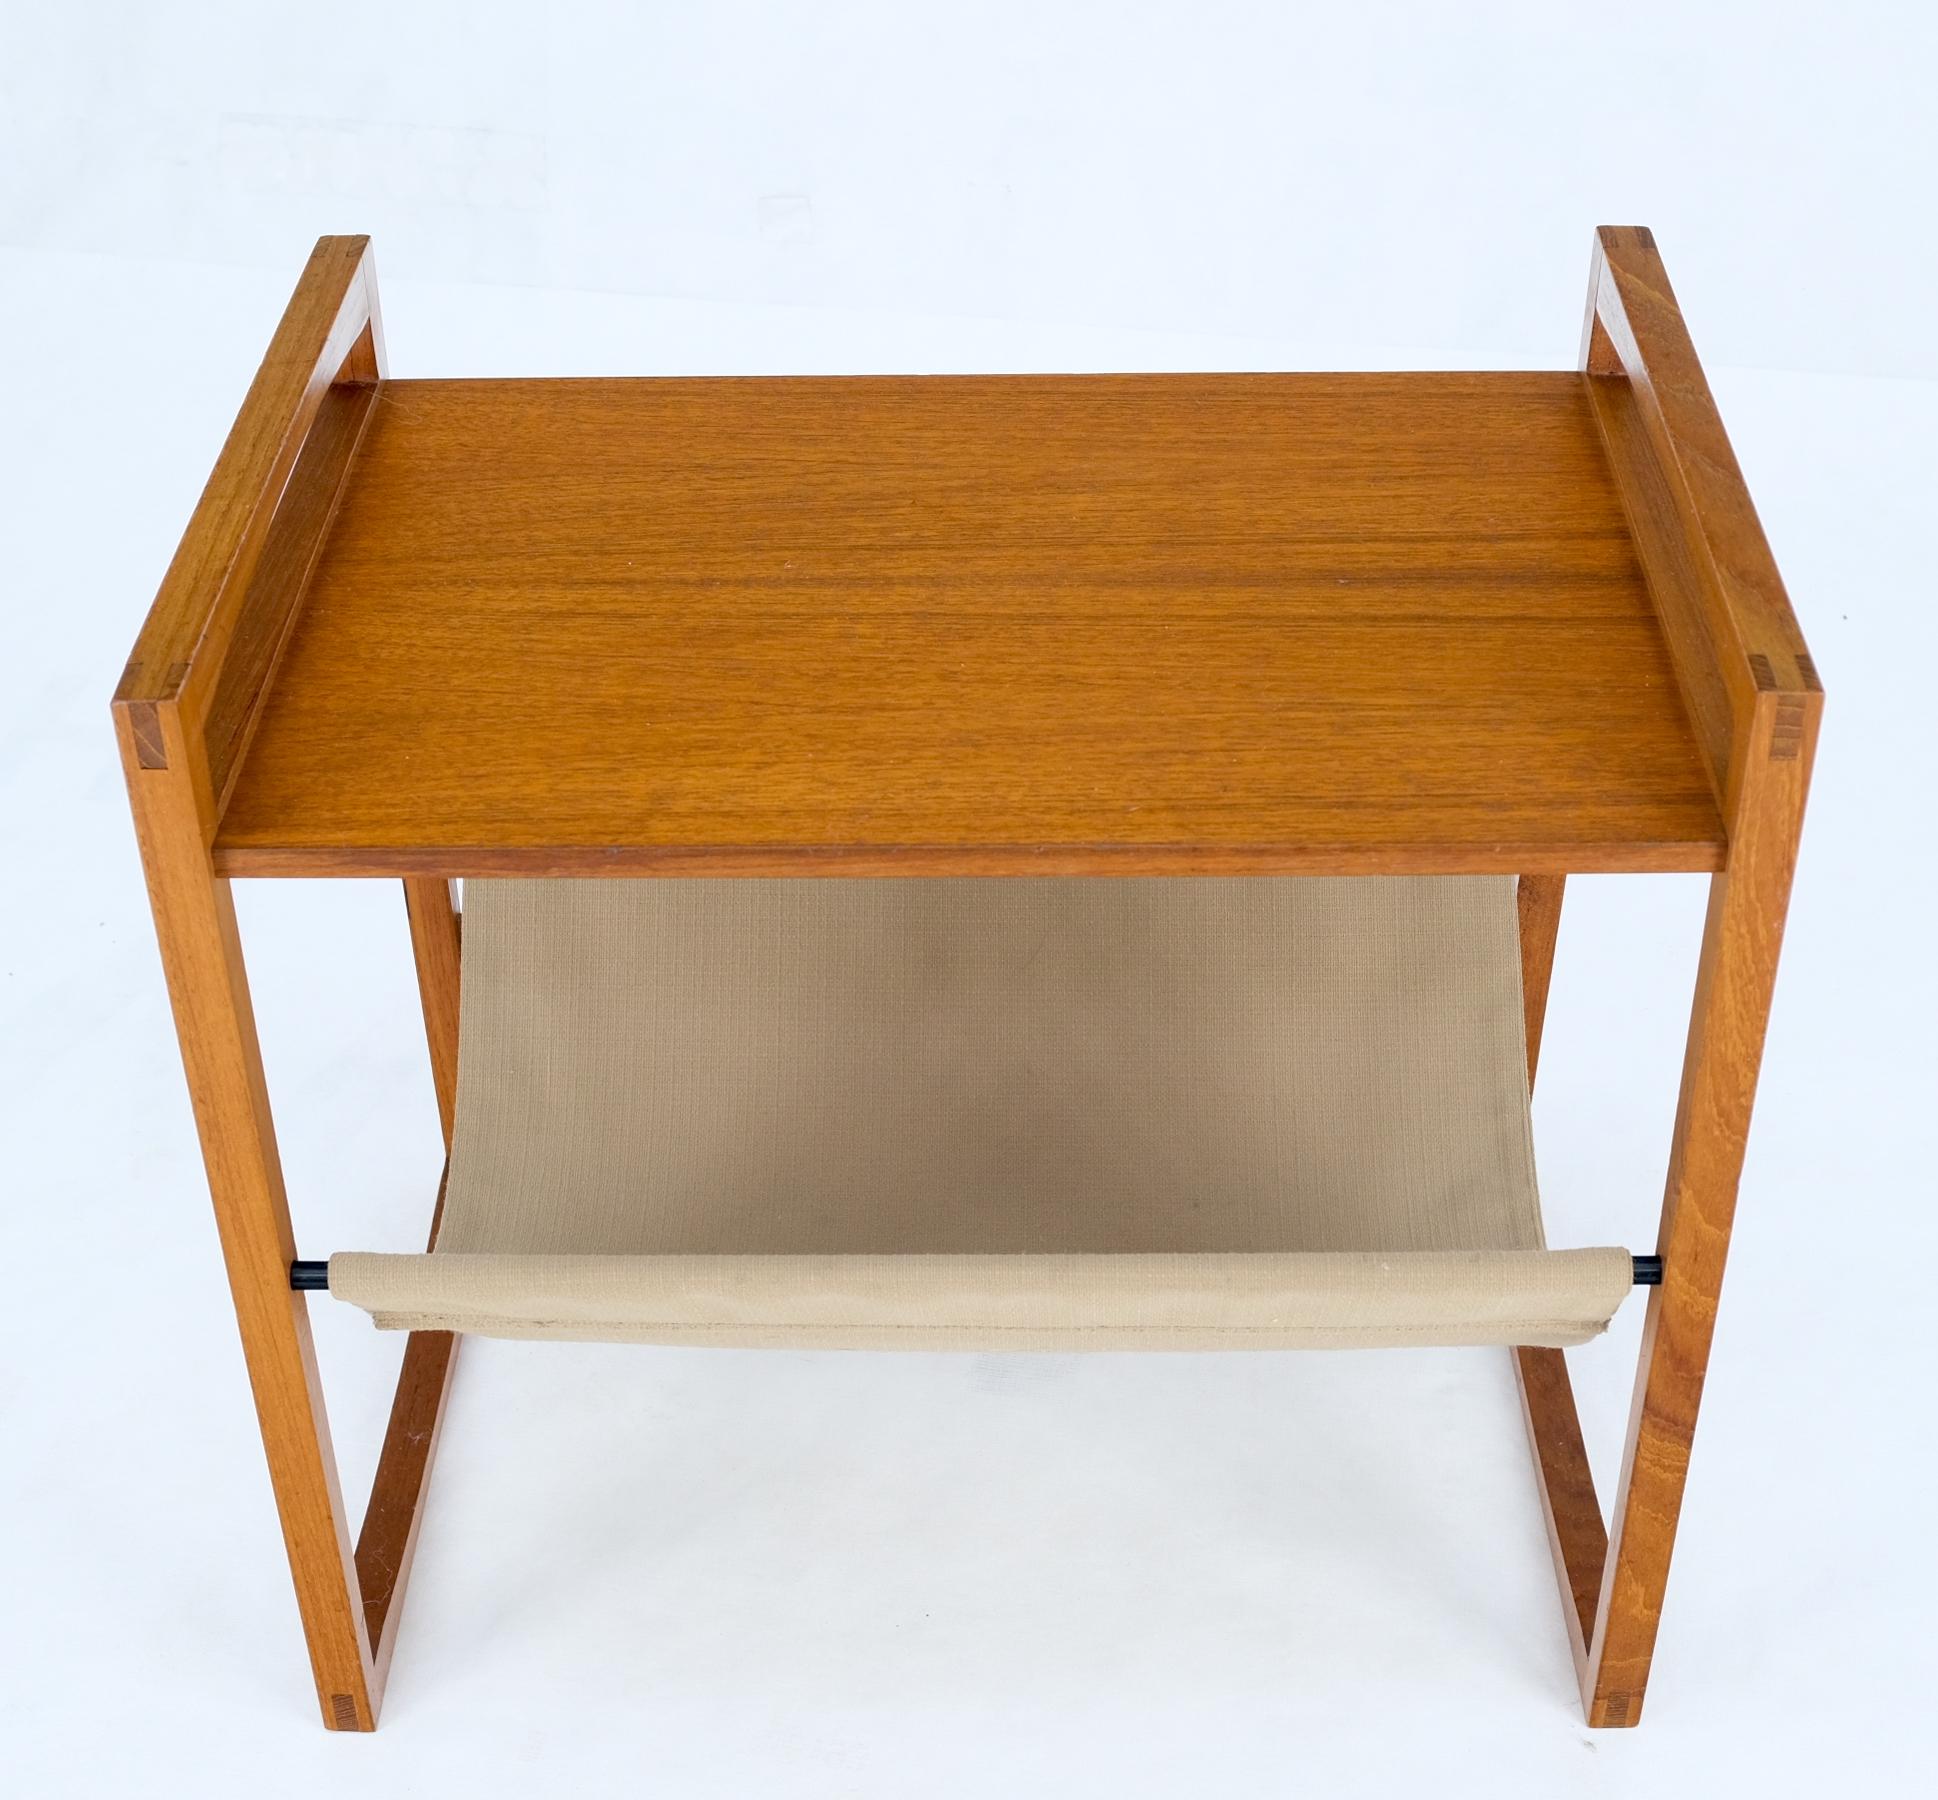 Teak And Suede Sling Shelf Mid-Century Modern End Table Stand Magazine Rack For Sale 1